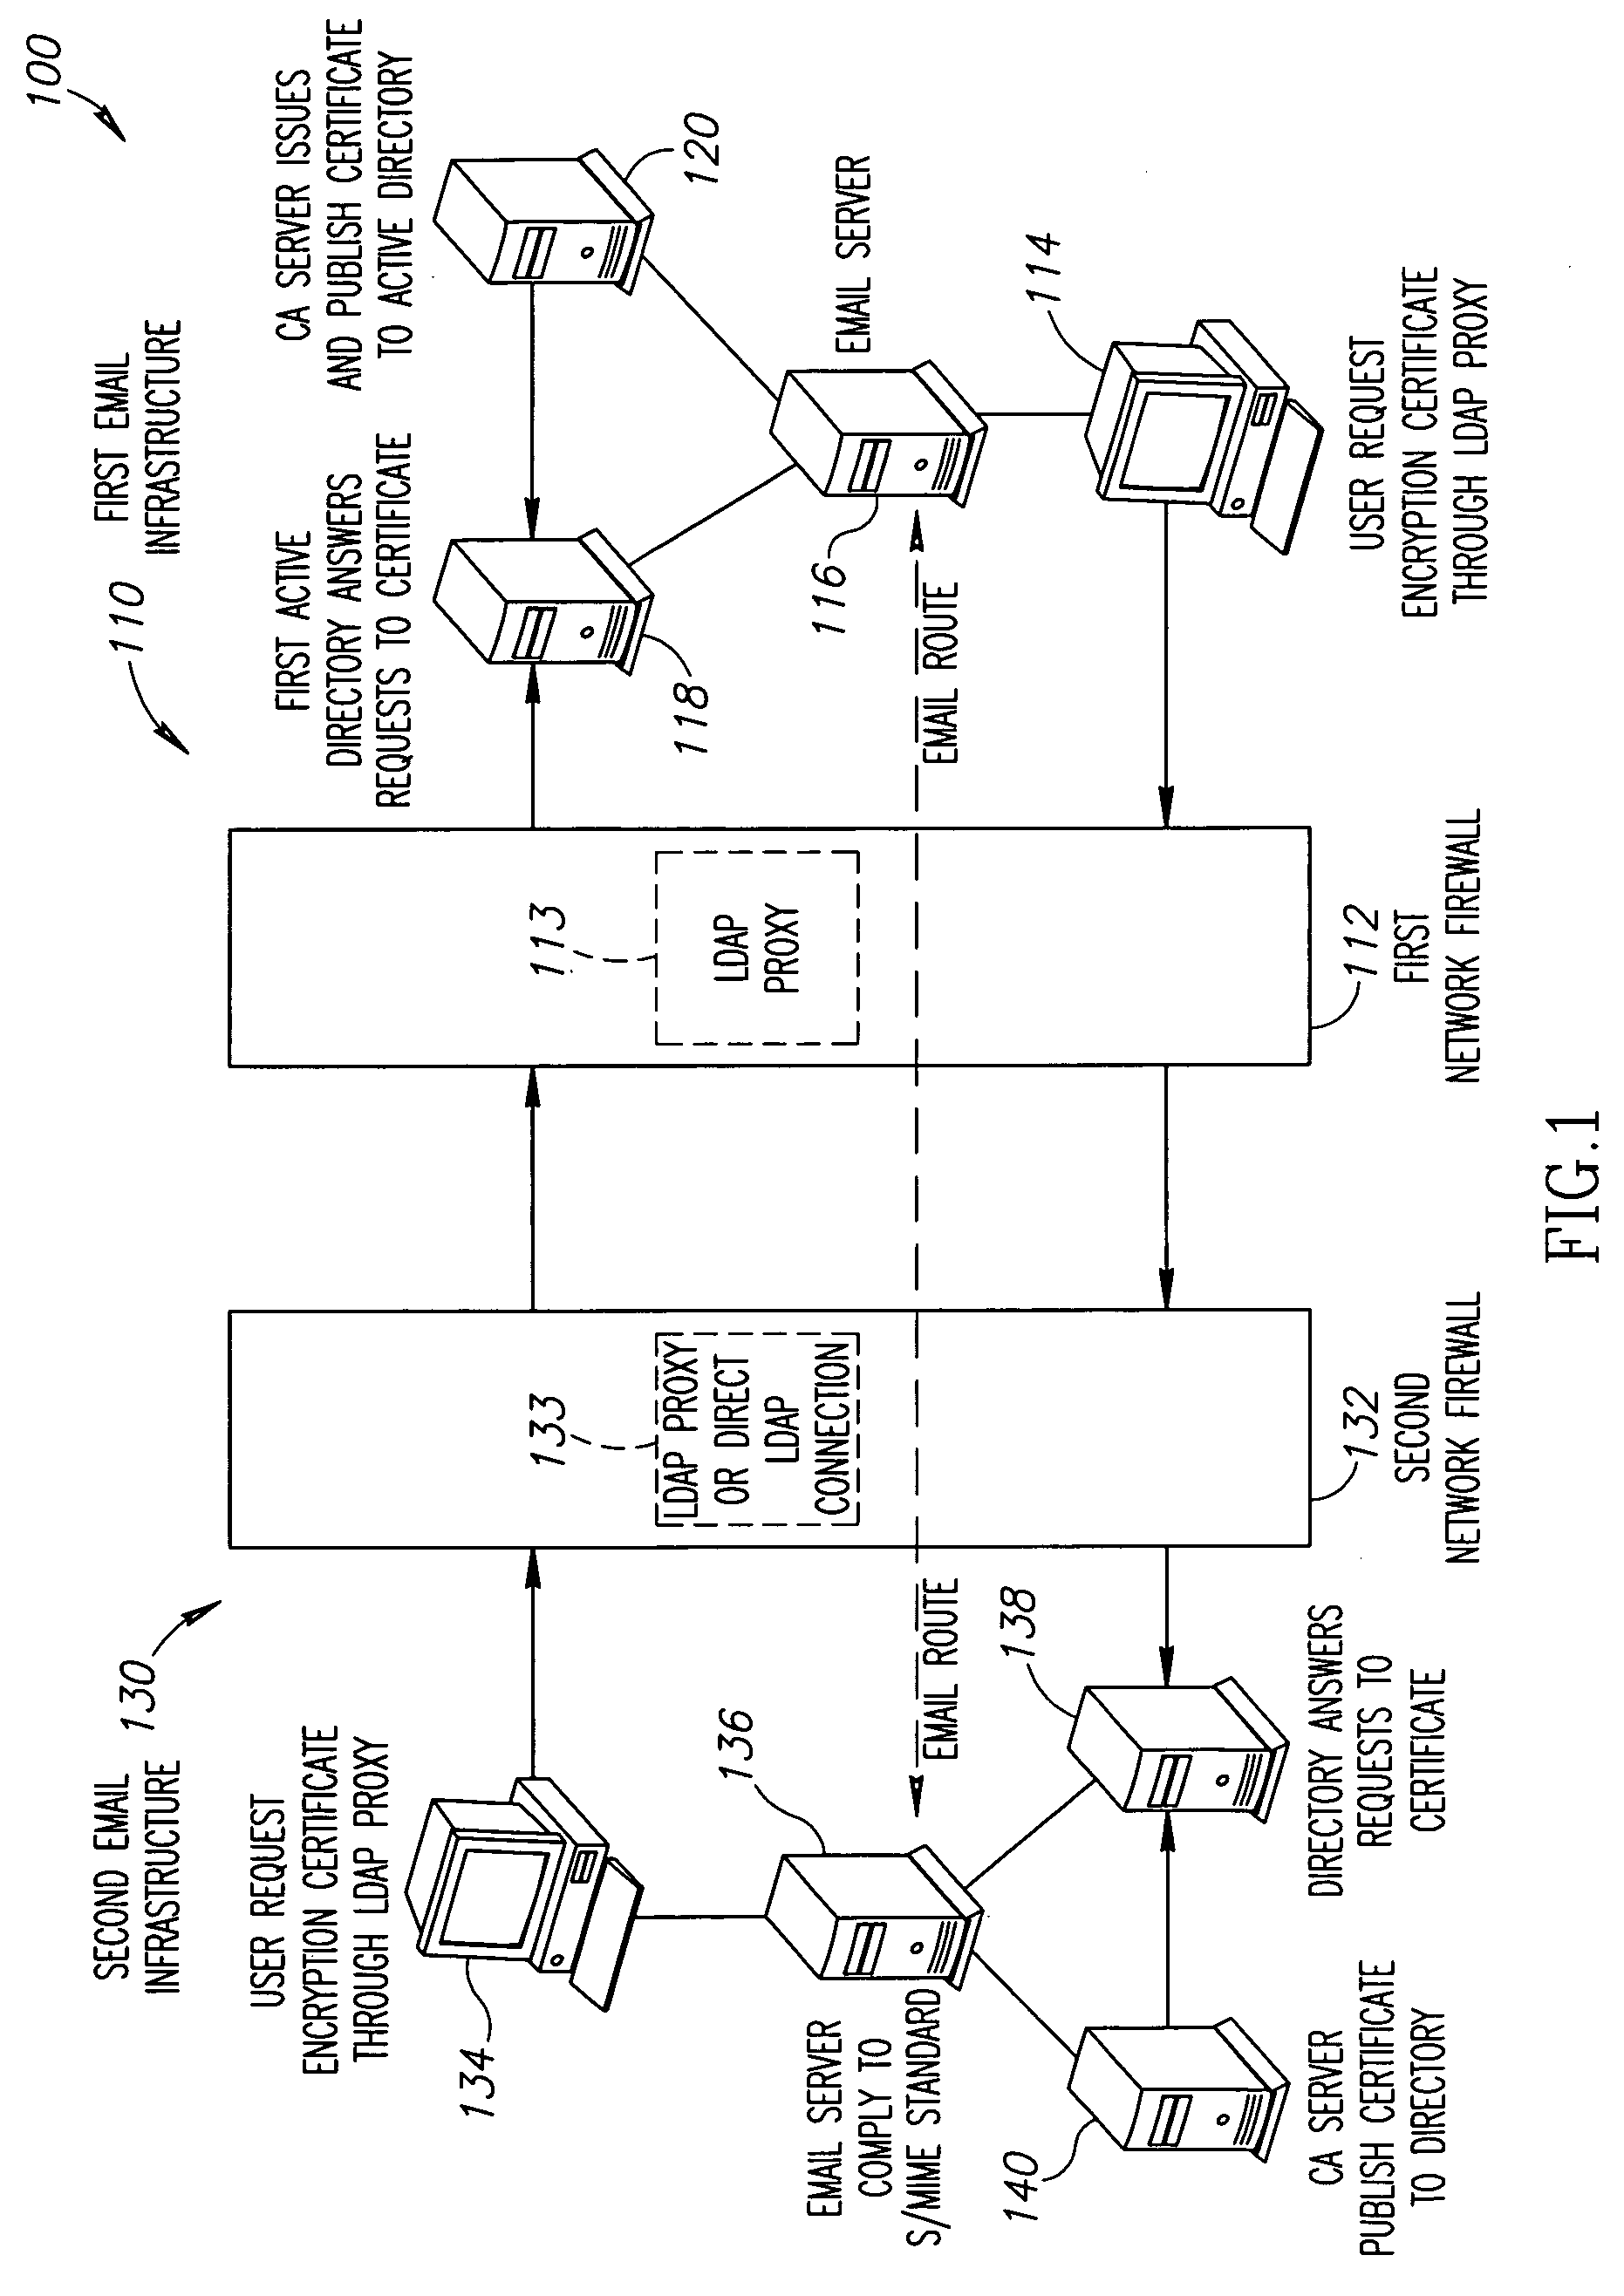 Systems and methods for automated exchange of electronic mail encryption certificates